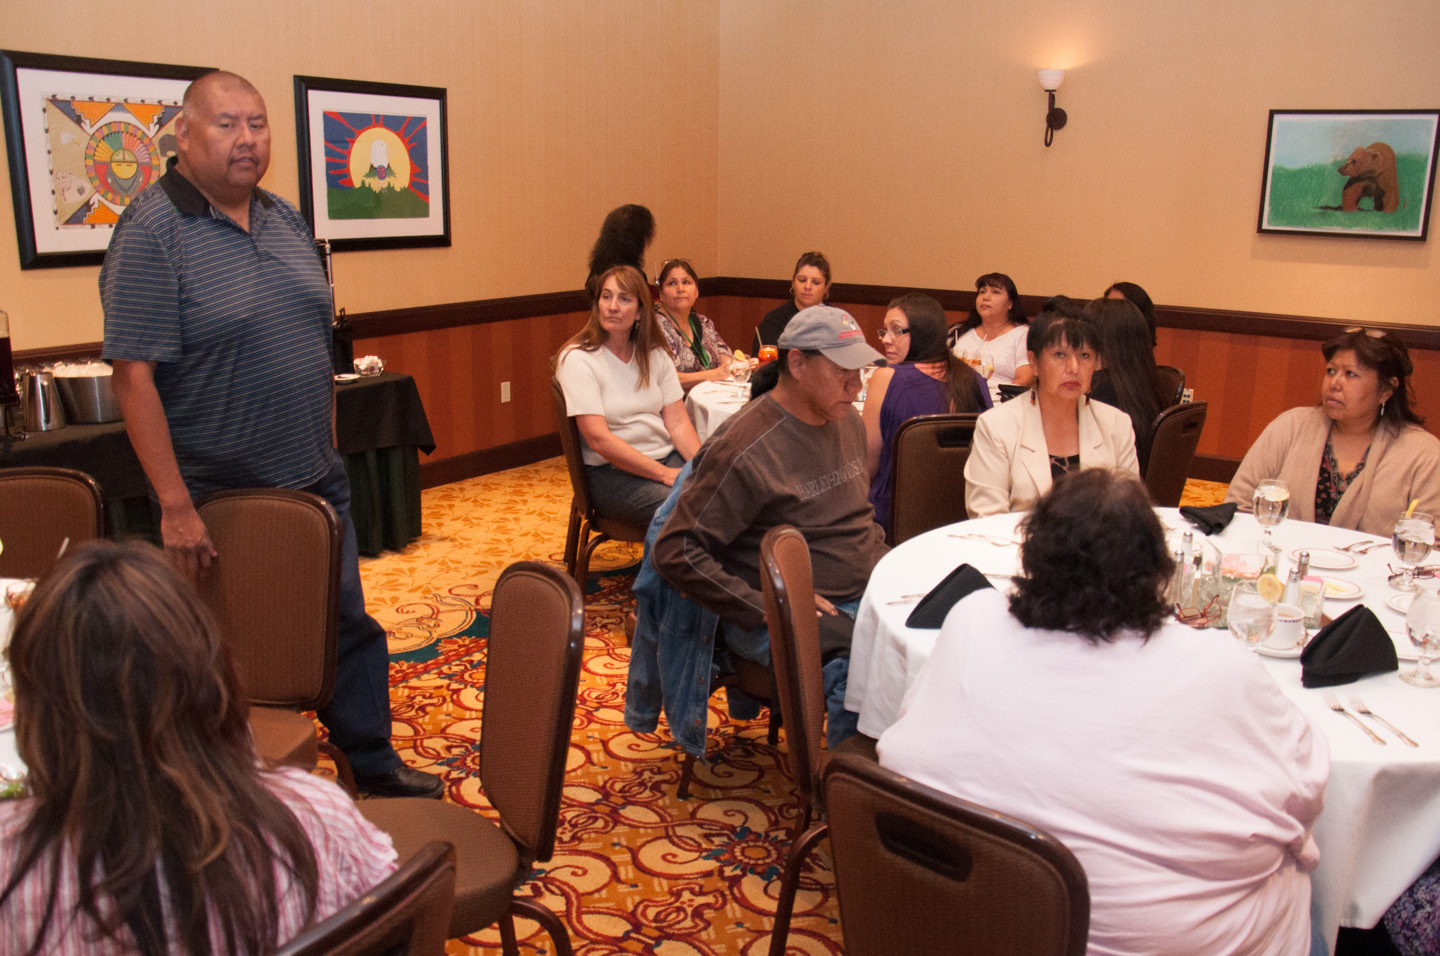 Members of the Southern Ute Indian Tribal Council toasted teachers and Education Department staff during a lunch at the Sky Ute Casino Resort on Wednesday, May 29. Councilman Alex S. Cloud said the future of the tribe is in good hands.